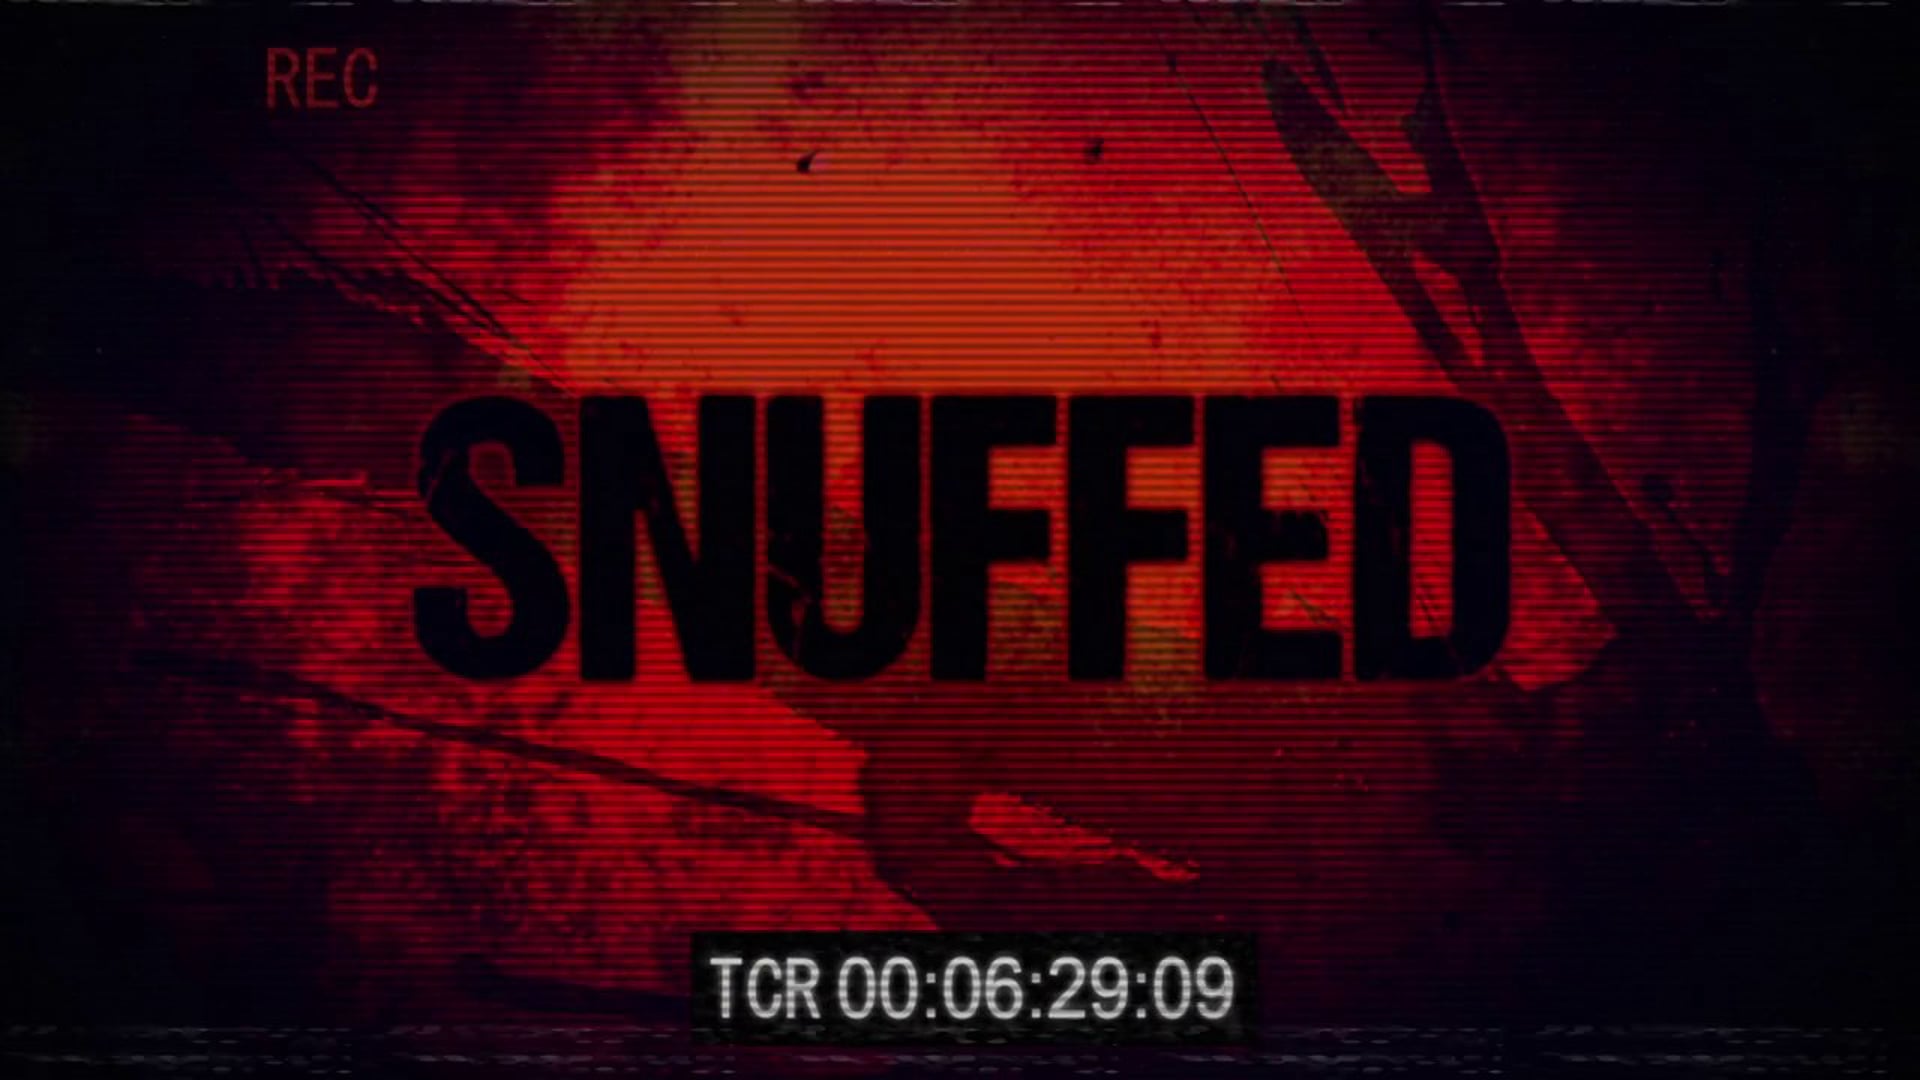 SNUFFED: THE PREVIEW